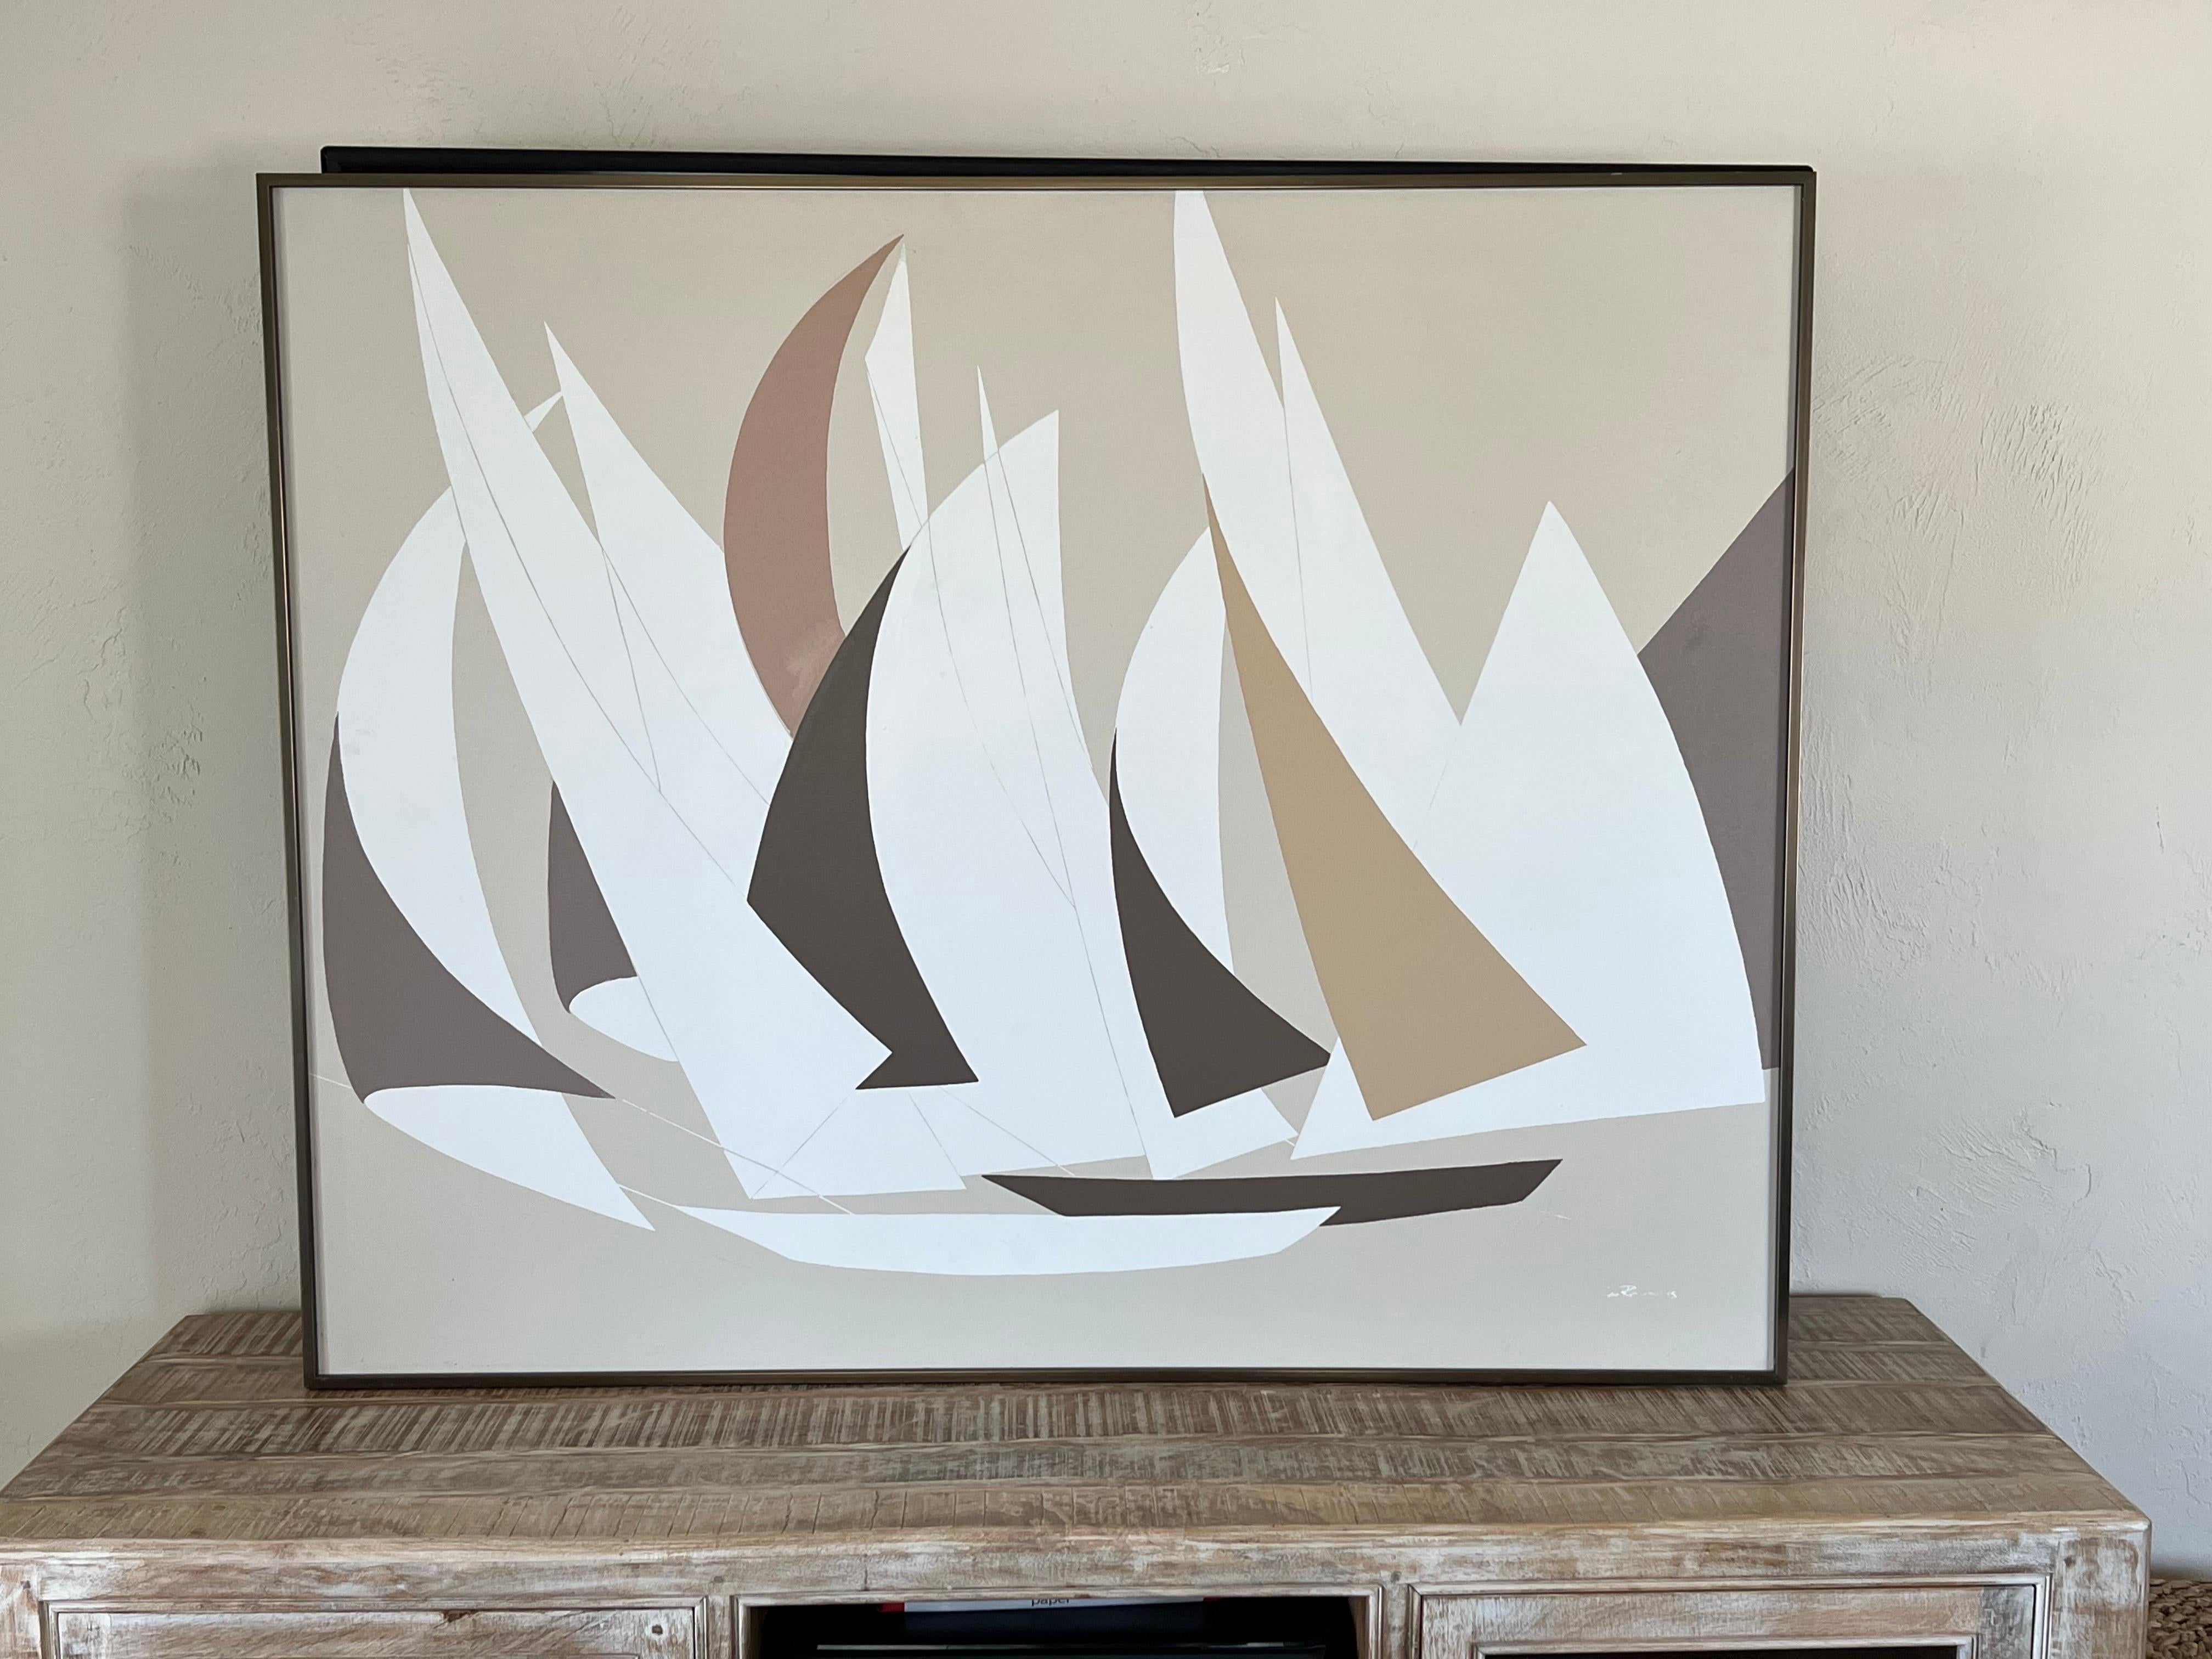 Monumental Sailboat Painting by Lee Reynolds of Vanguard studios. Minimalist design of sailboats in muted cream and brown tones. Framed in a gun metal colored frame. White glove shipping is recommended . This item is too large to parcel ship.